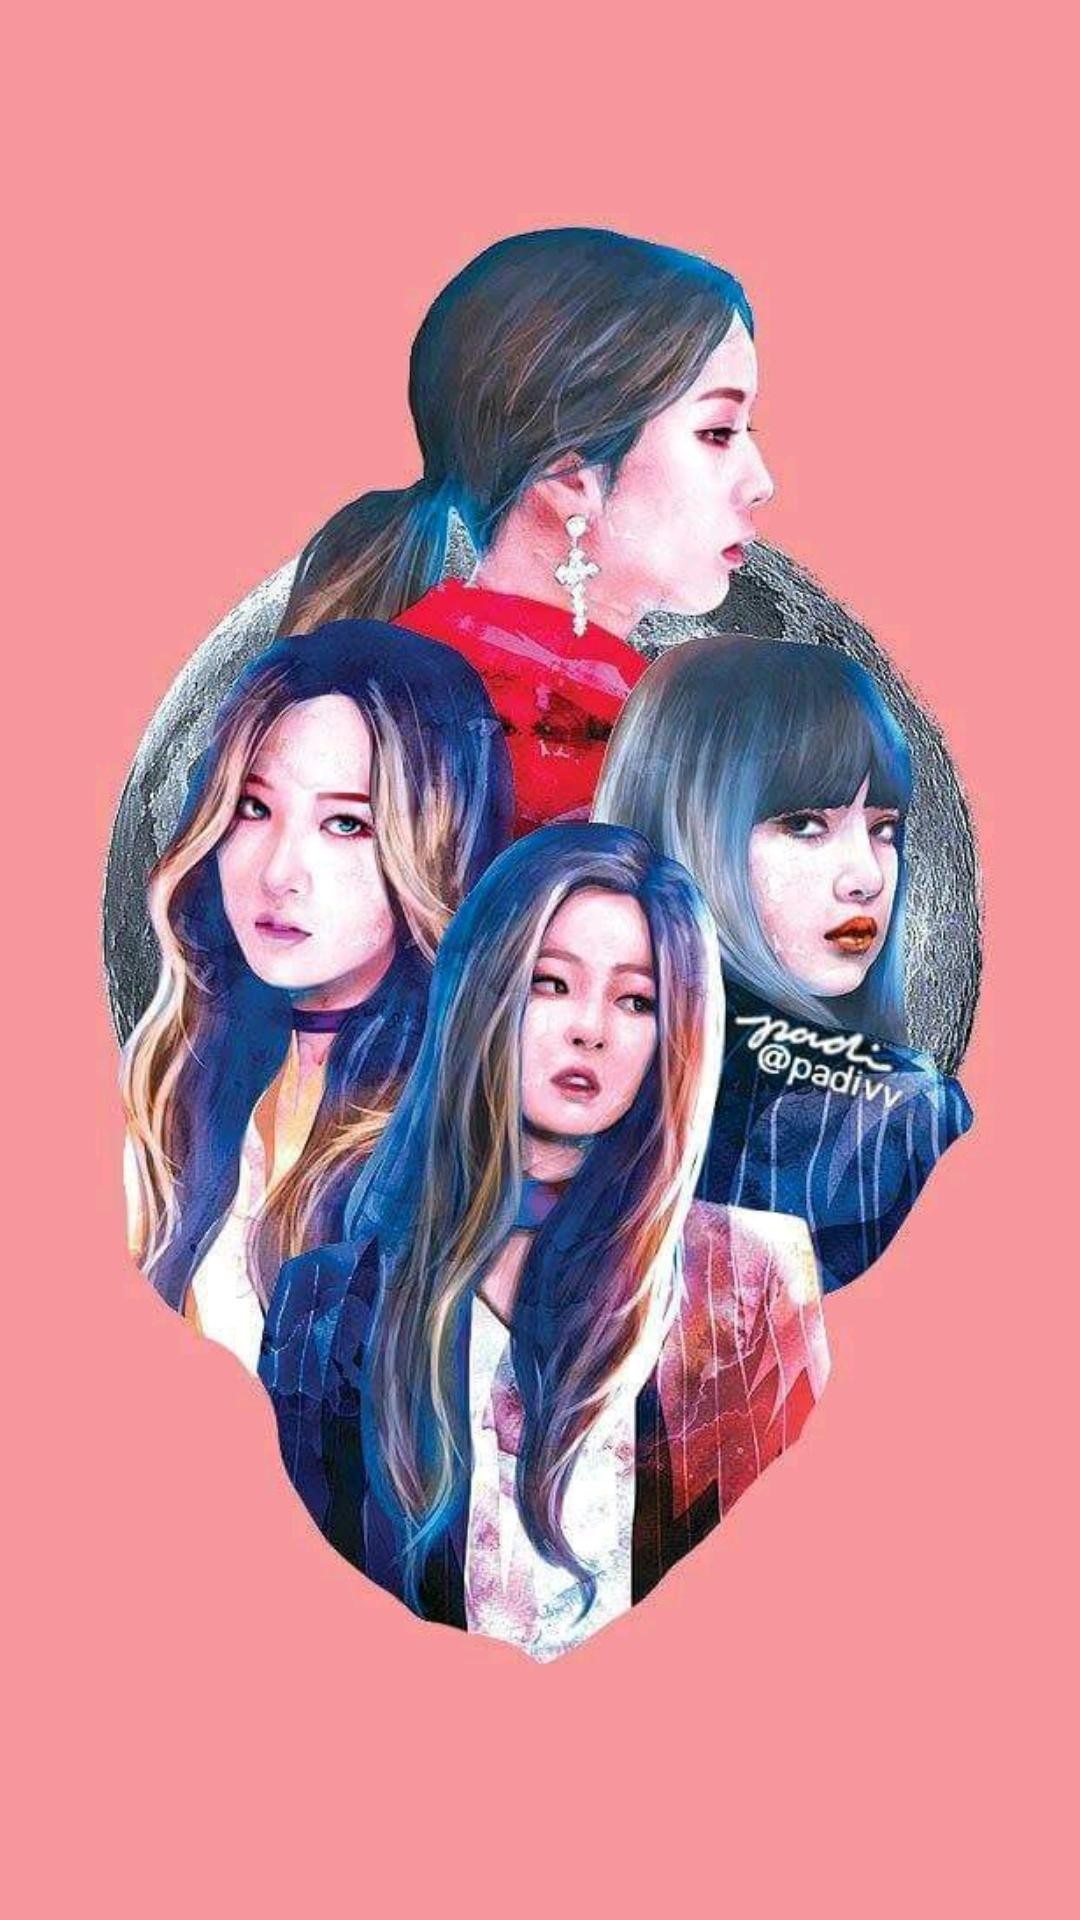 blackpink wallpaper,product,friendship,youth,photography,black hair